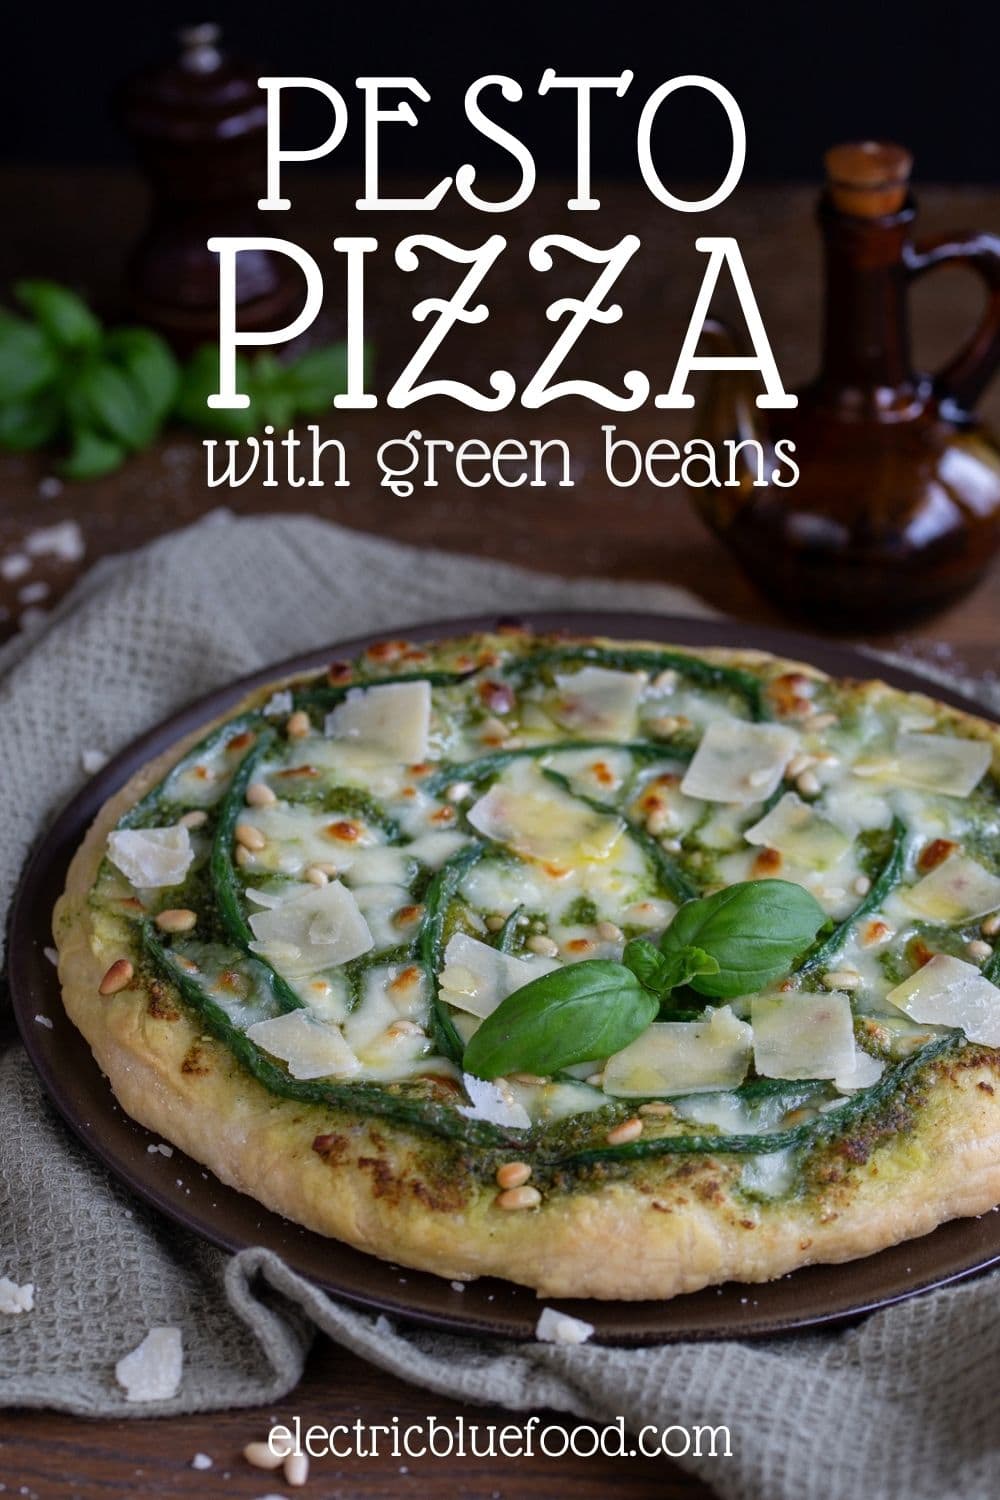 Pesto pizza with green beans is inspired by classic pasta al pesto from Liguria. It is topped with parmesan flakes and pine nuts for a fantastic flavour in this vegetarian pizza without tomato sauce.